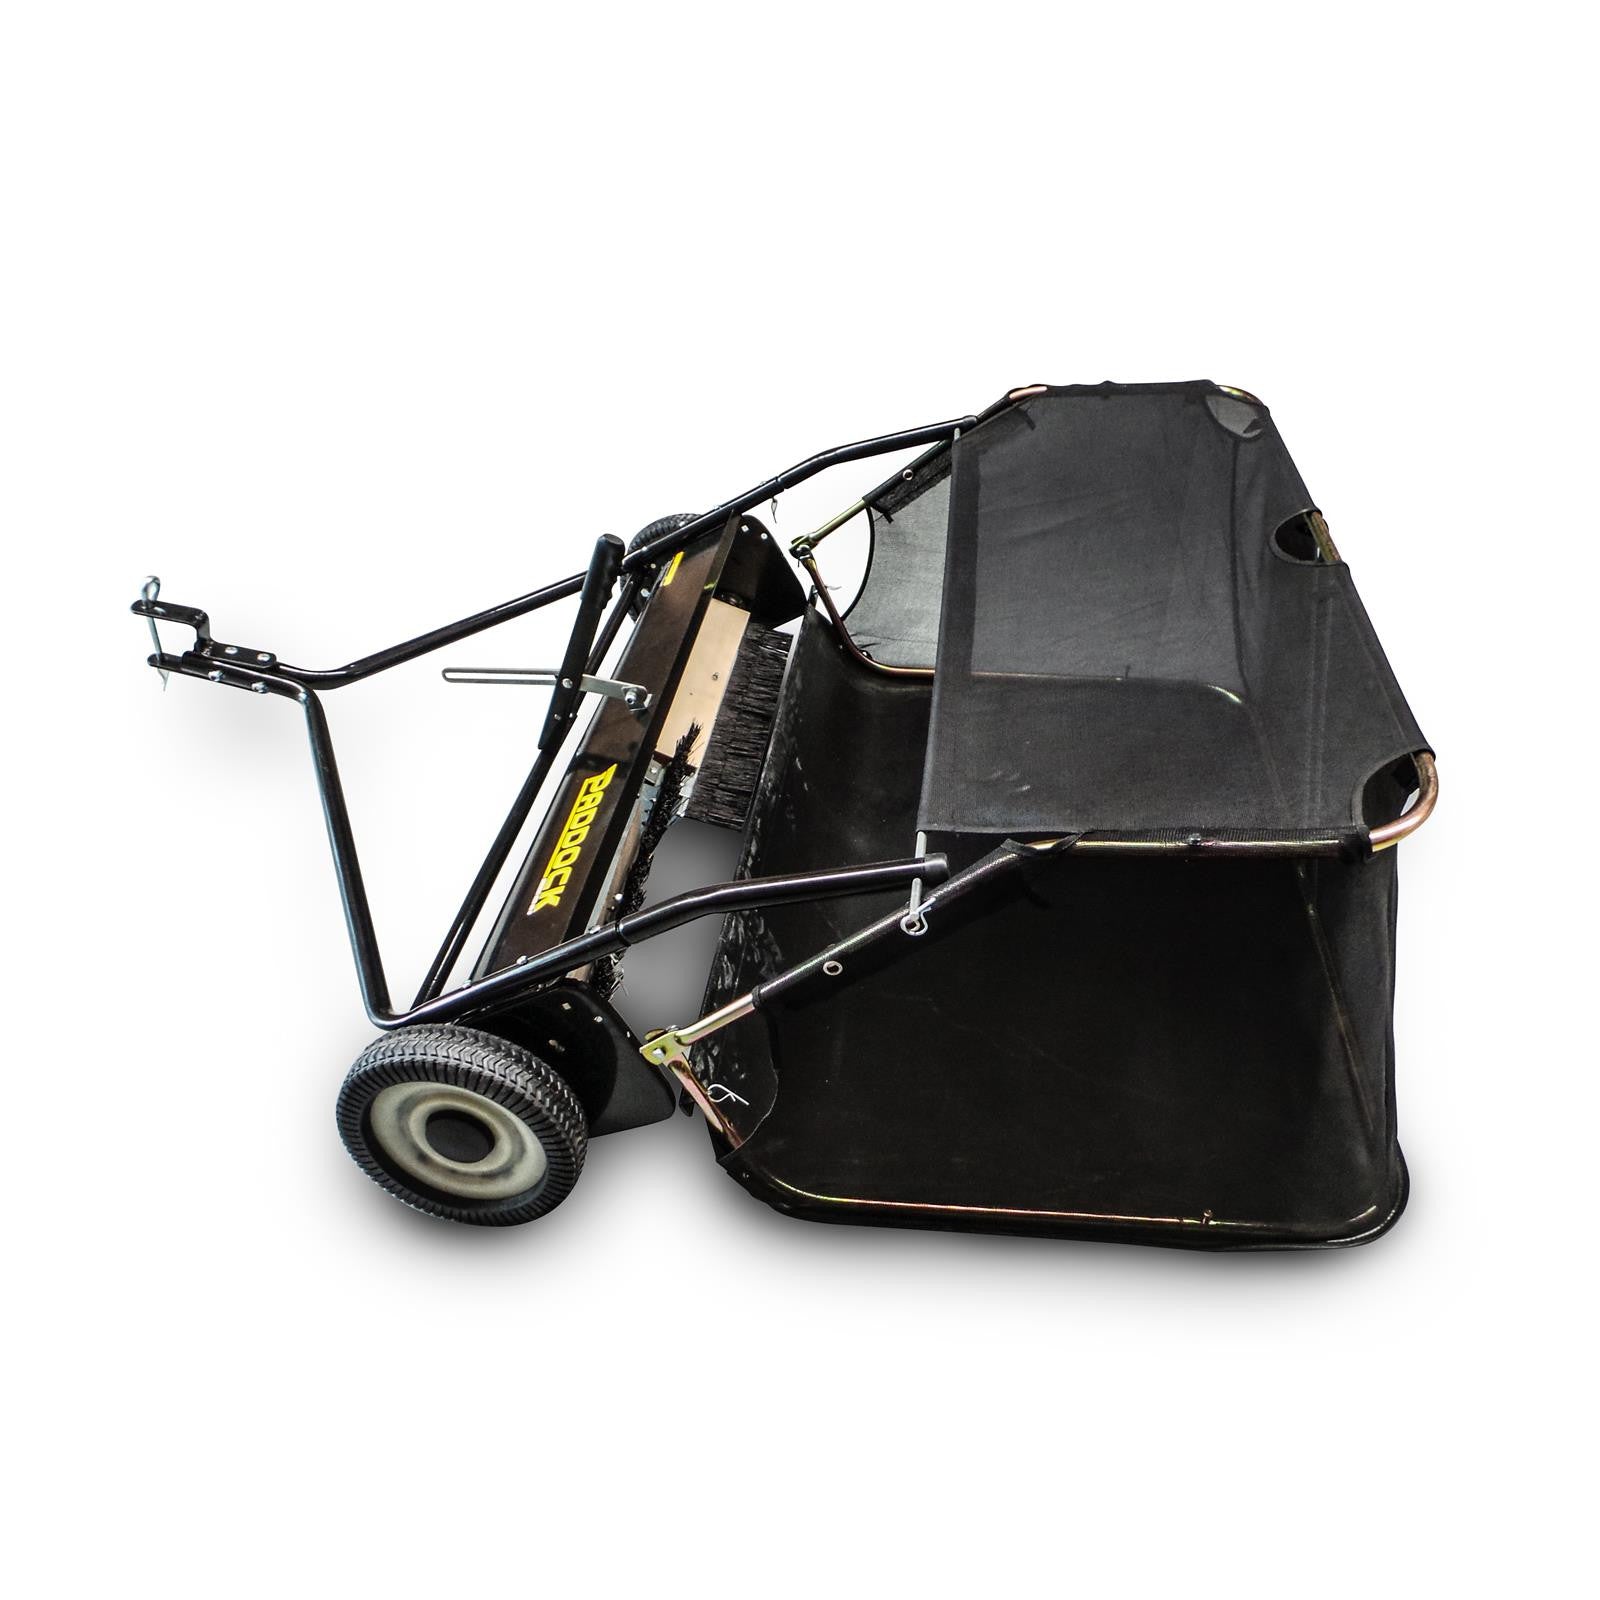 lawn sweeper for grass clippings